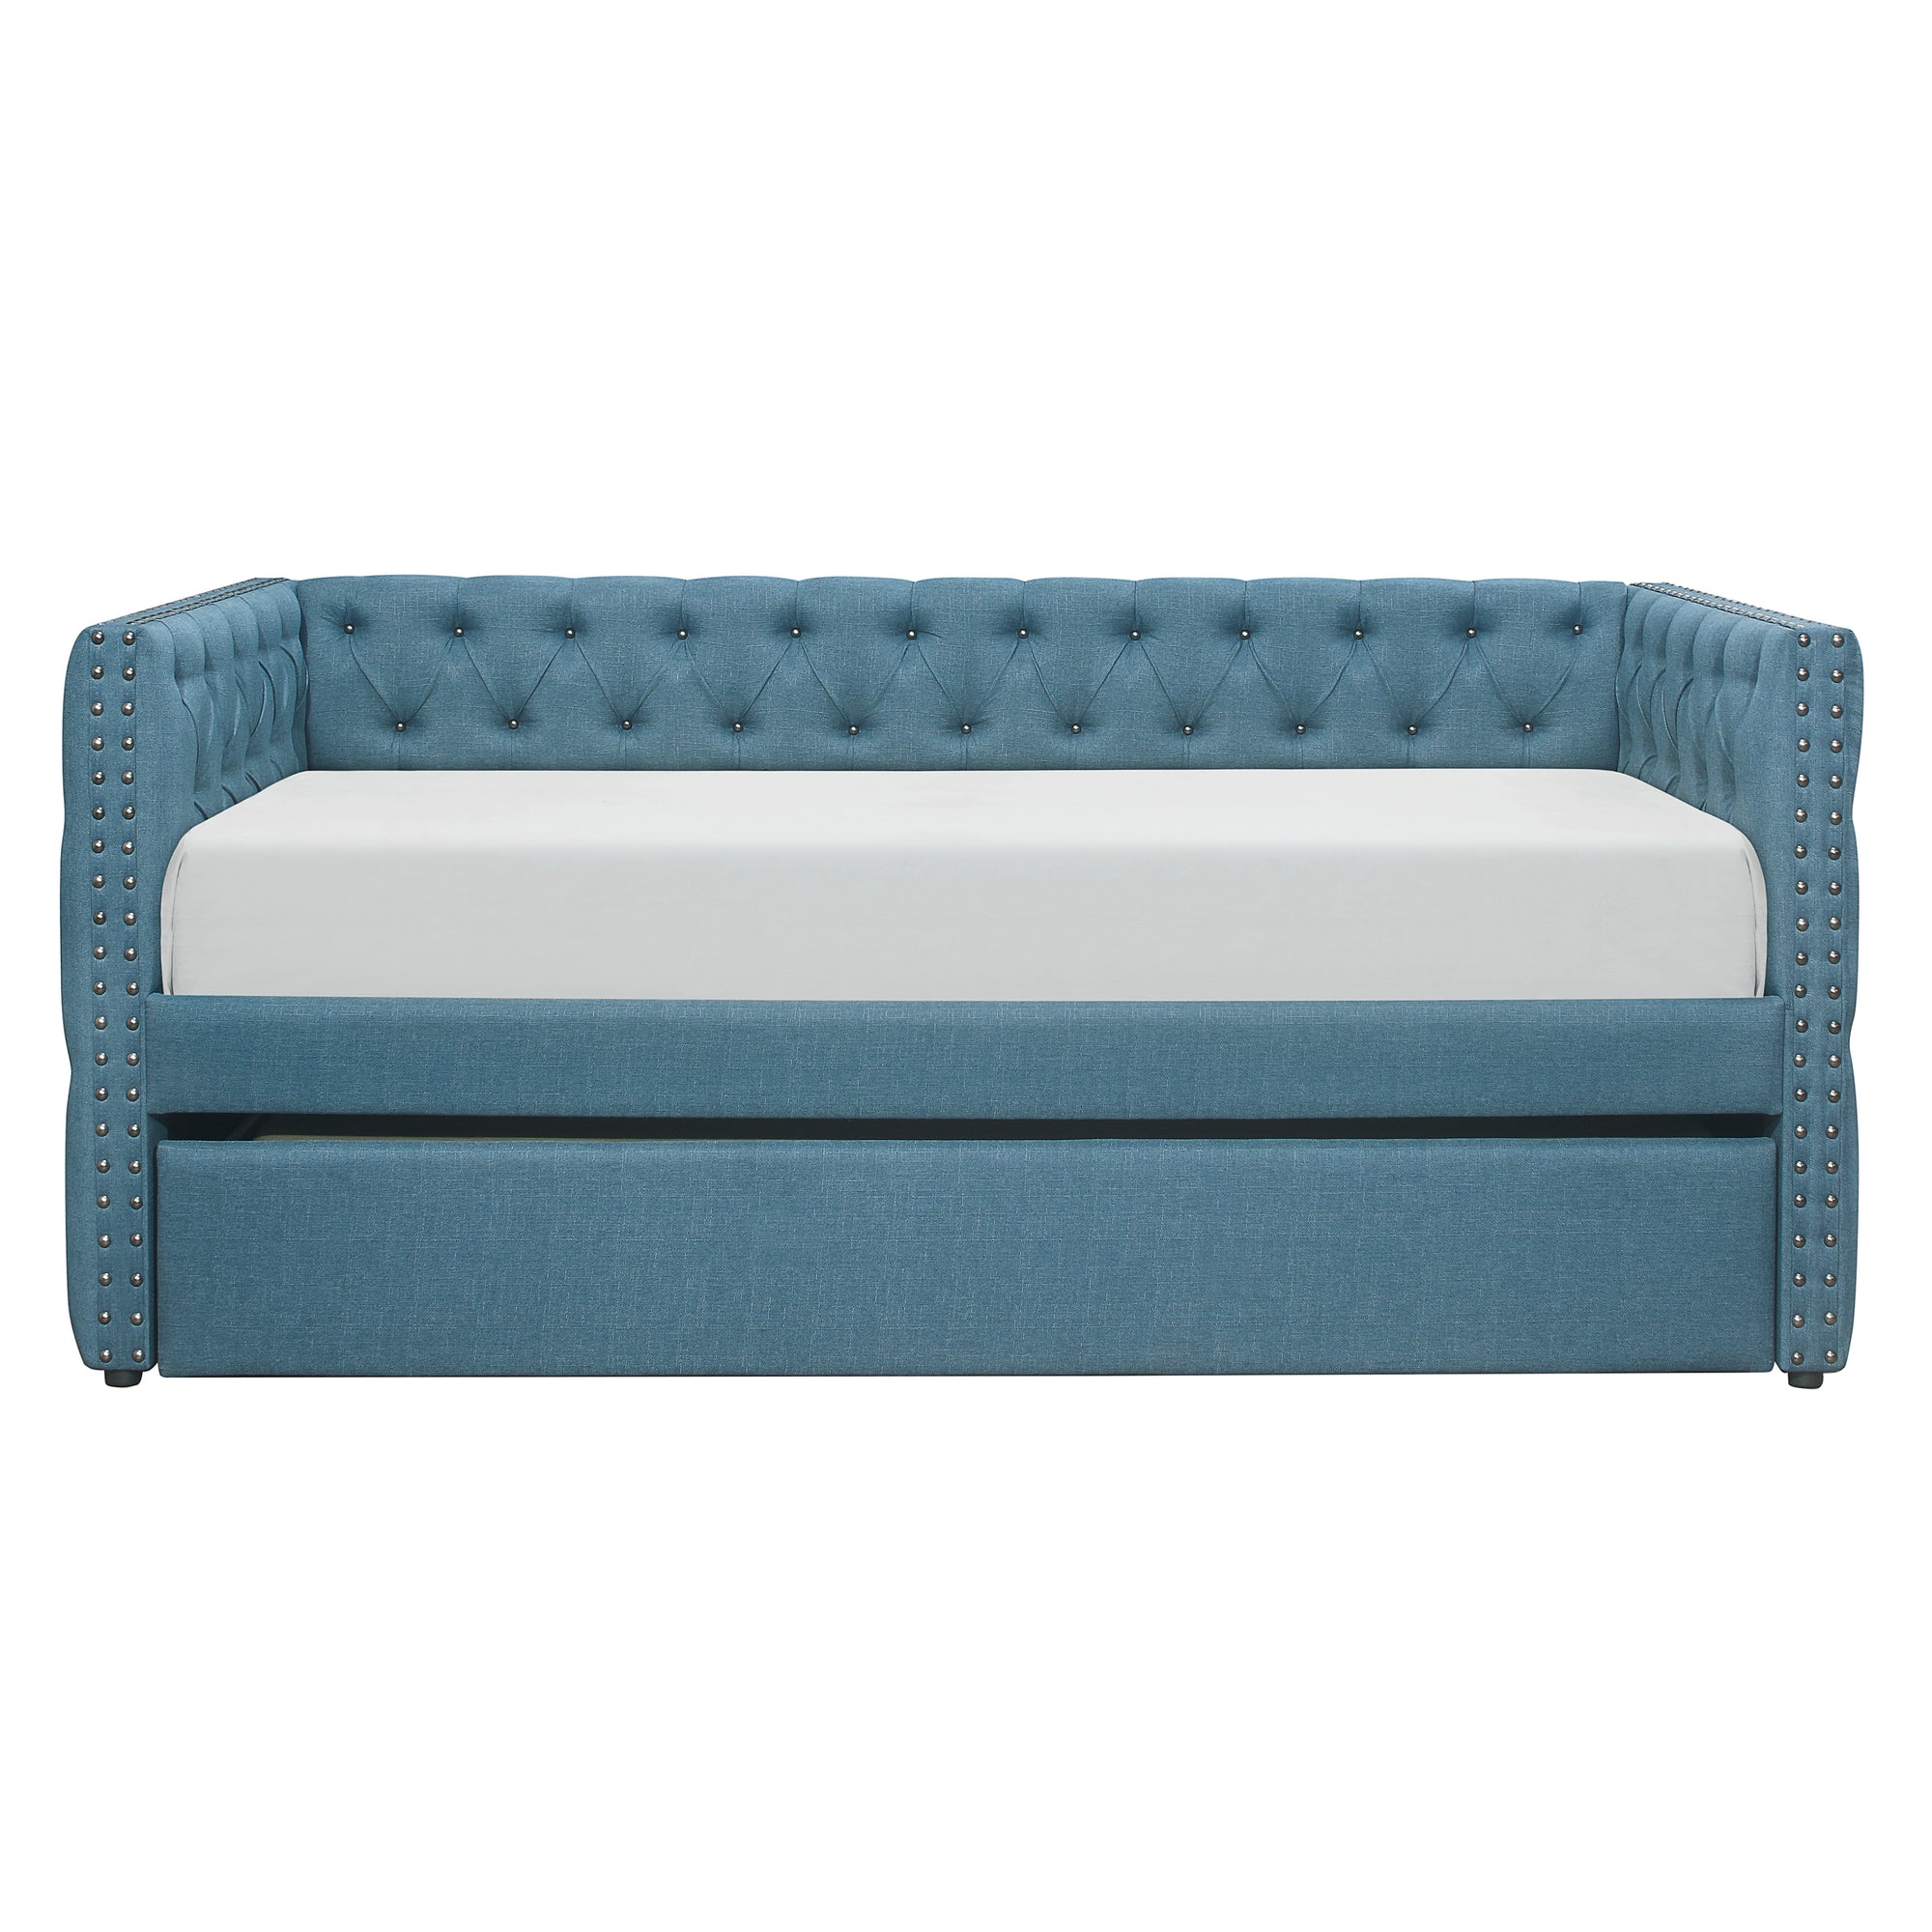 Kiwi Daybed with Trundle